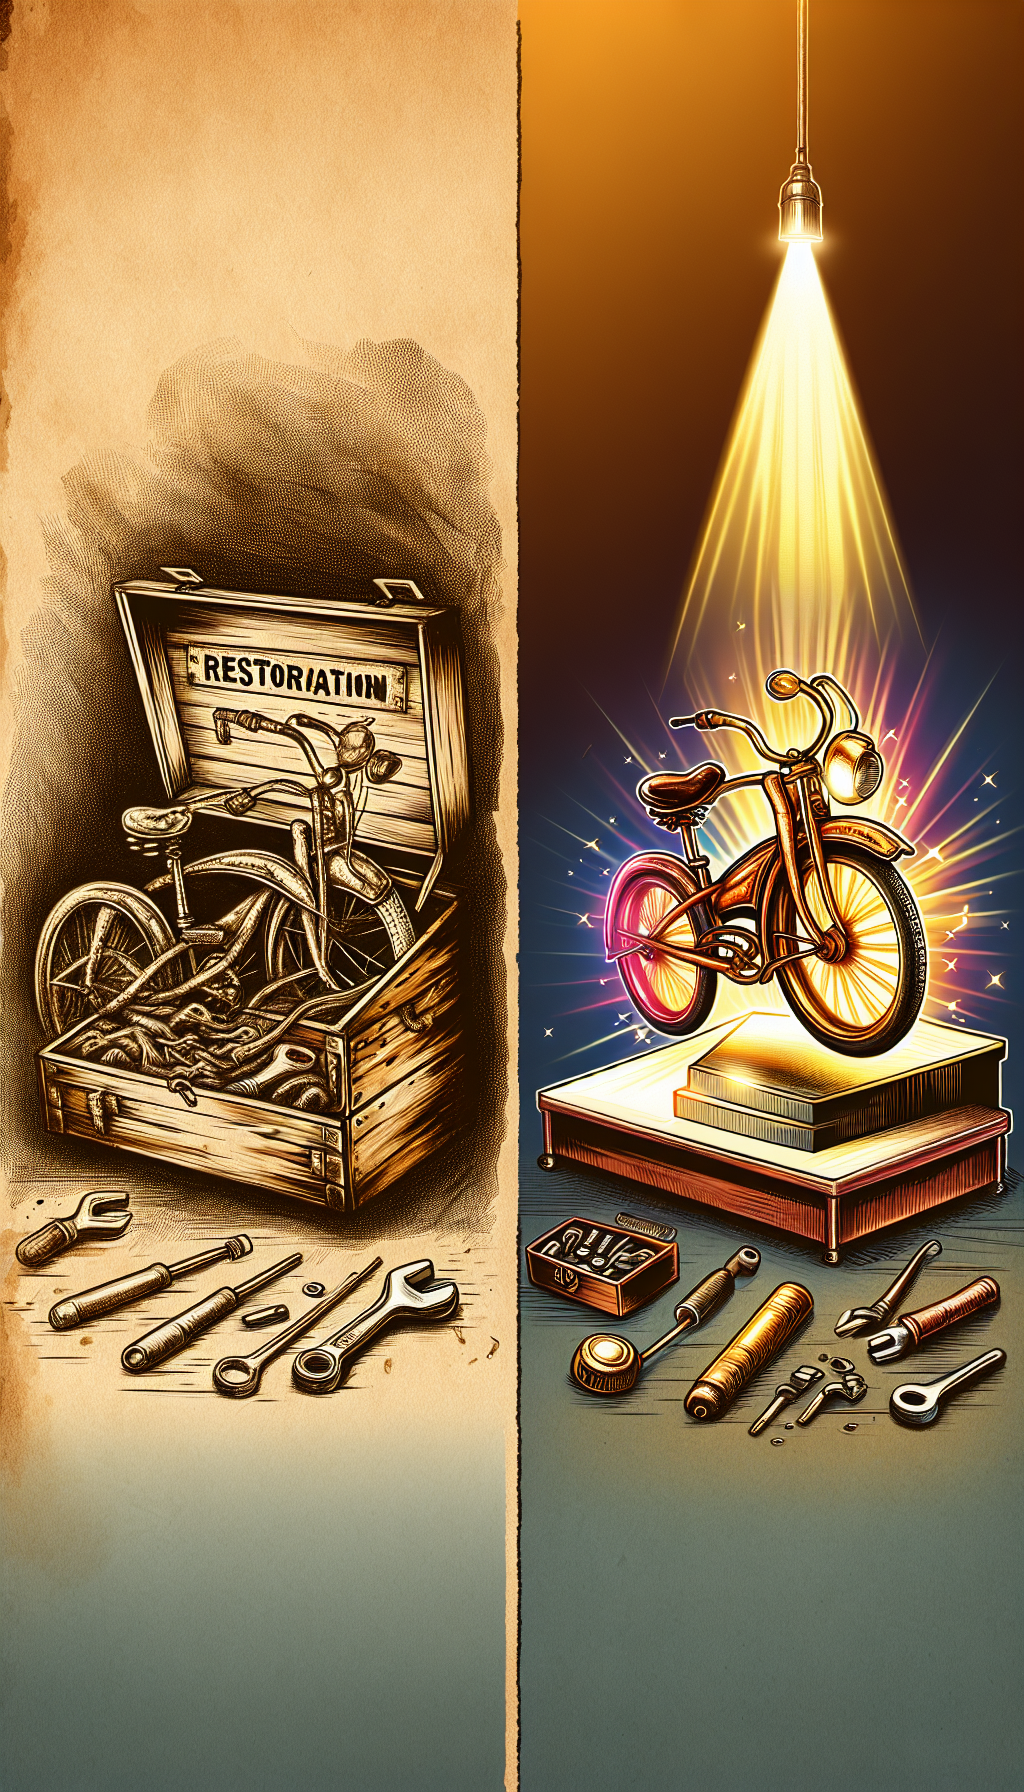 A split-frame illustration reveals a rusty antique tricycle evolving into a polished gem. On the left, dilapidated parts emerge from a "Restoration" toolbox; on the right, the restored tricycle sits atop a pedestal with a shining price tag, under a spotlight. Styles range from sketchy, sepia-toned outlines to glossy, vibrant colors, symbolizing the transformation and escalating value.